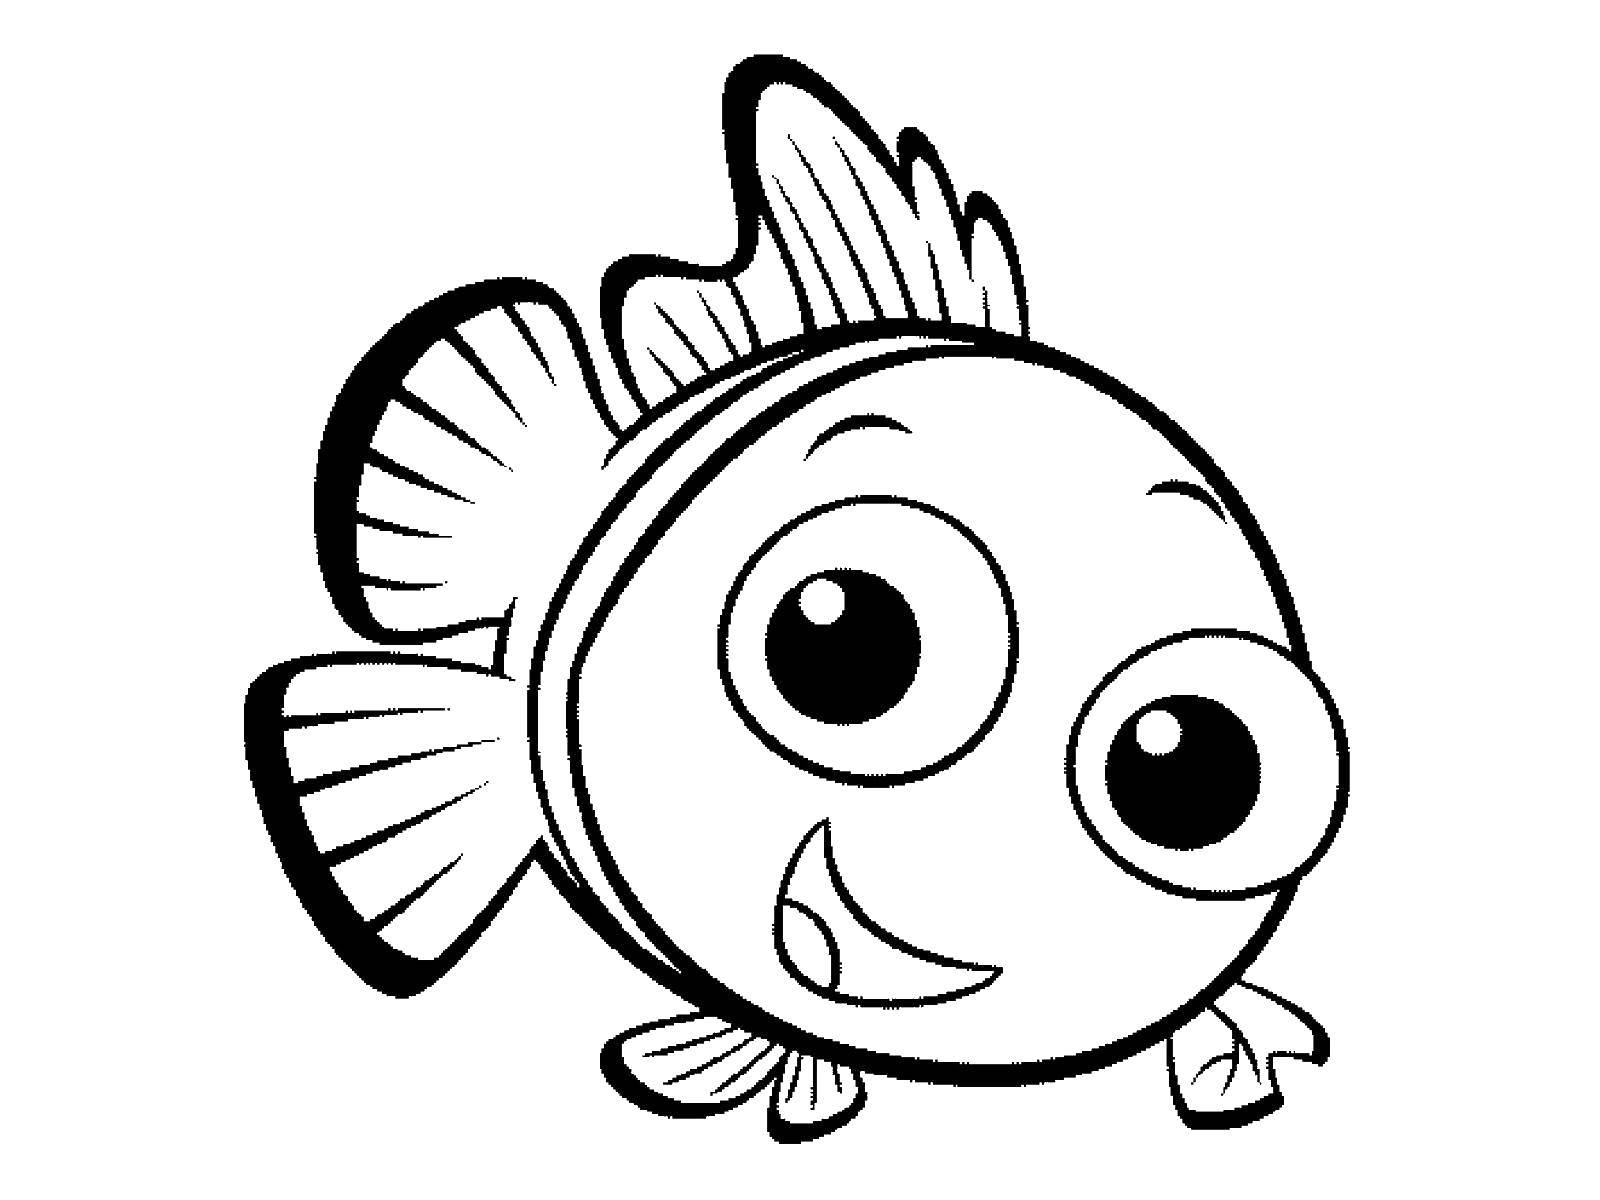 Coloring Funny fish. Category fish. Tags:  marine inhabitants, the sea, fish, water.